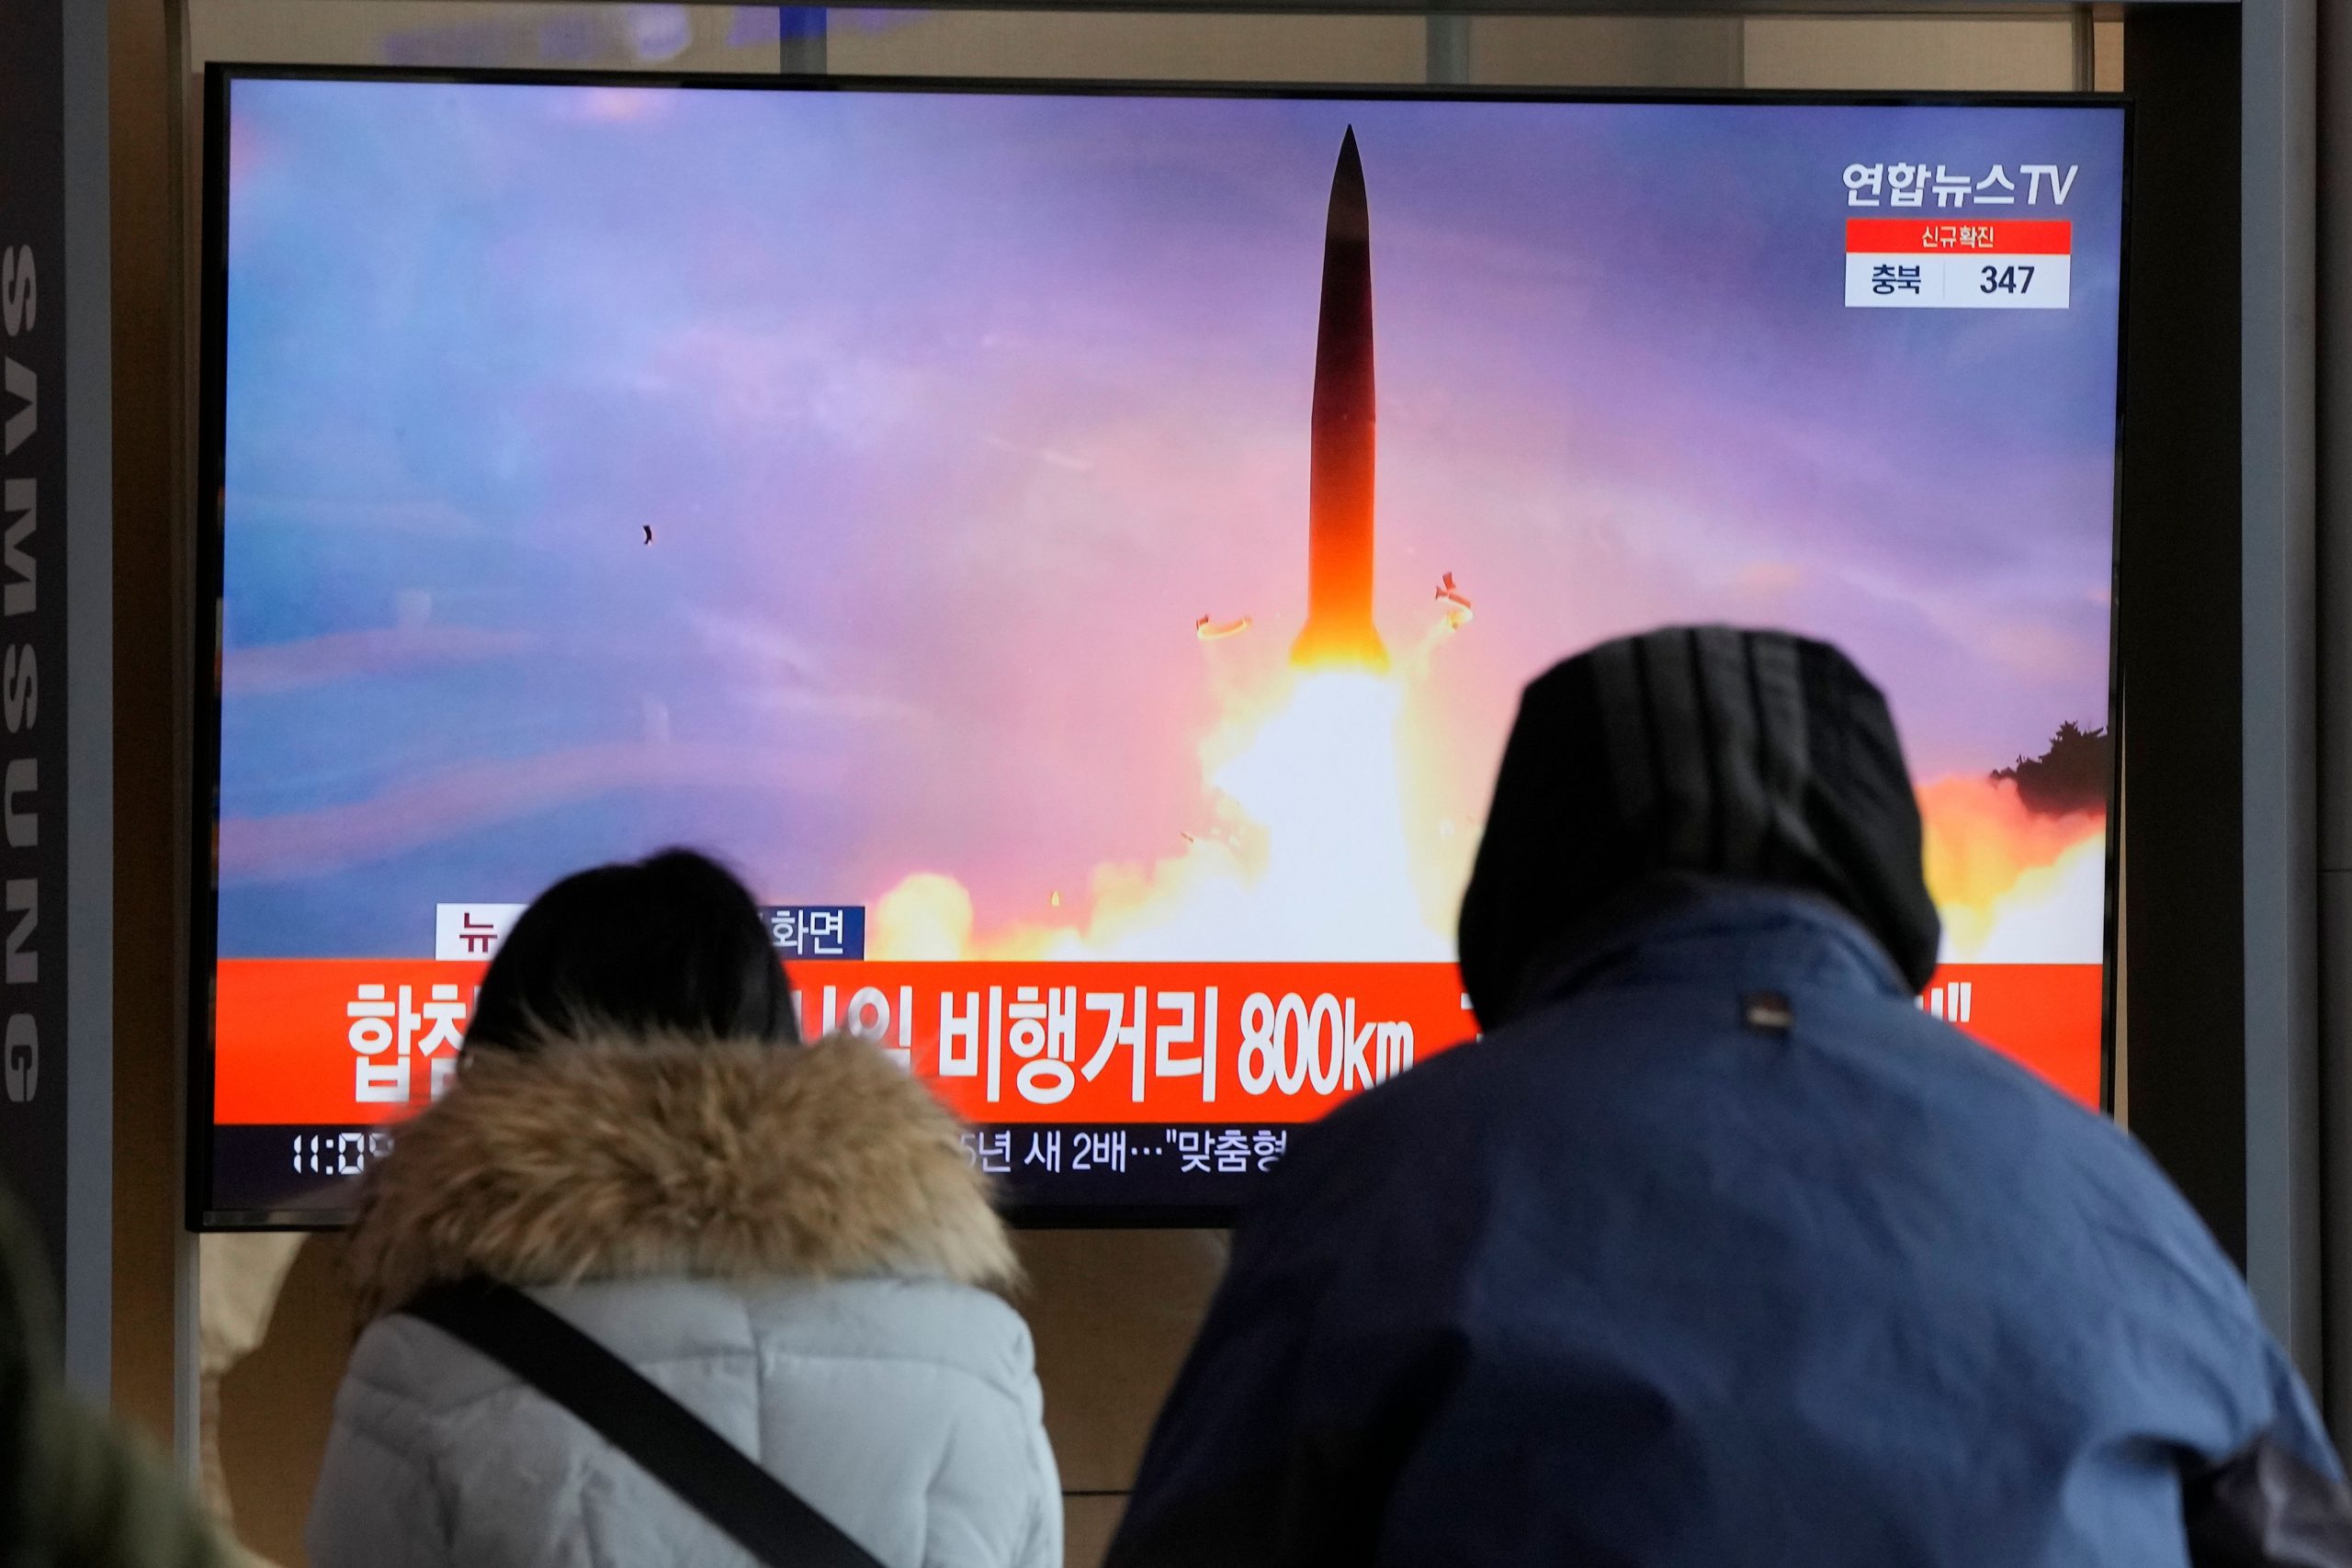 North Korea fires another missile, possibly ballistic, after a month’s break